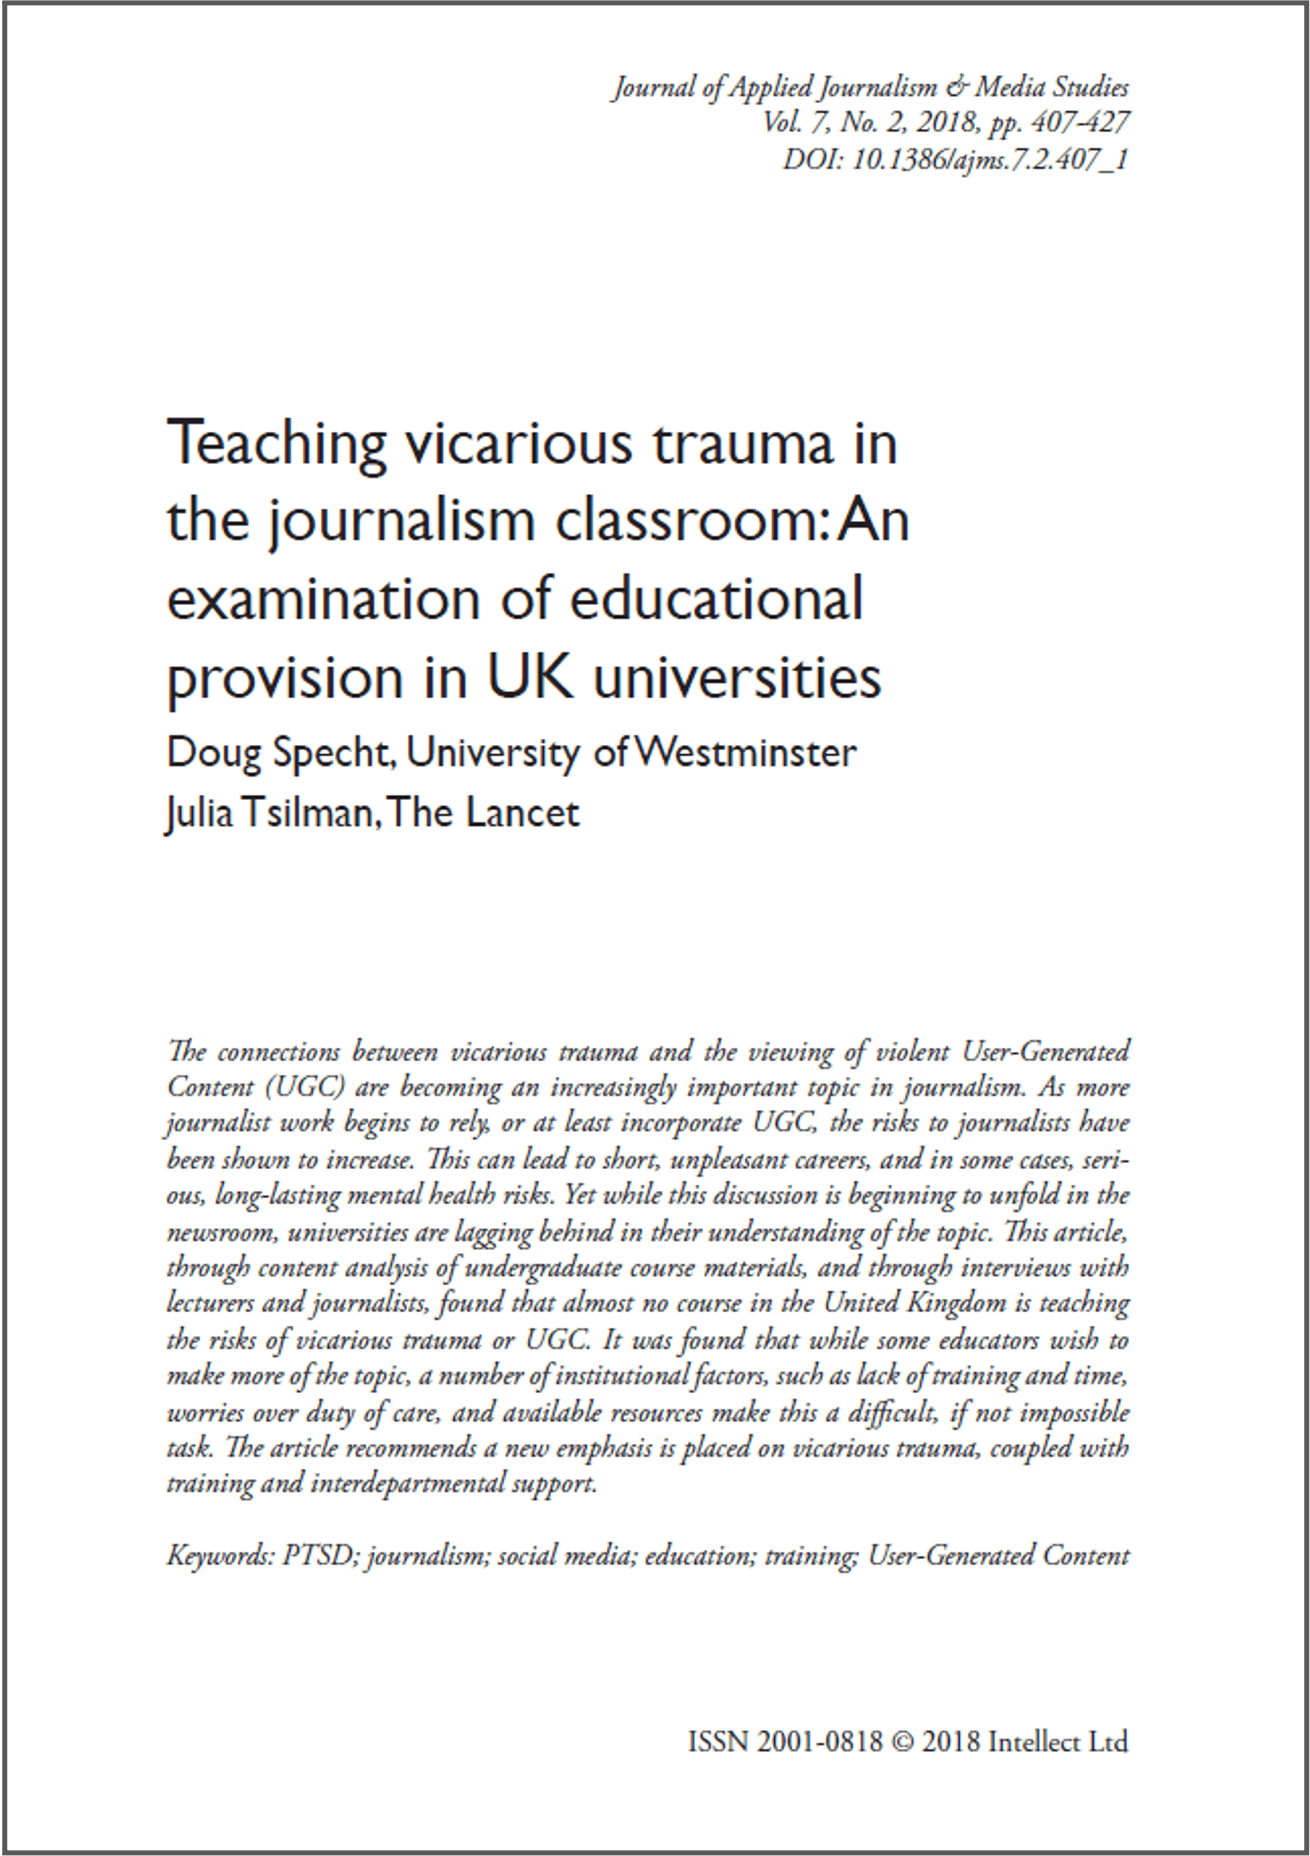 Teaching vicarious trauma in the journalism classroom: an examination of educational provision in UK Universities